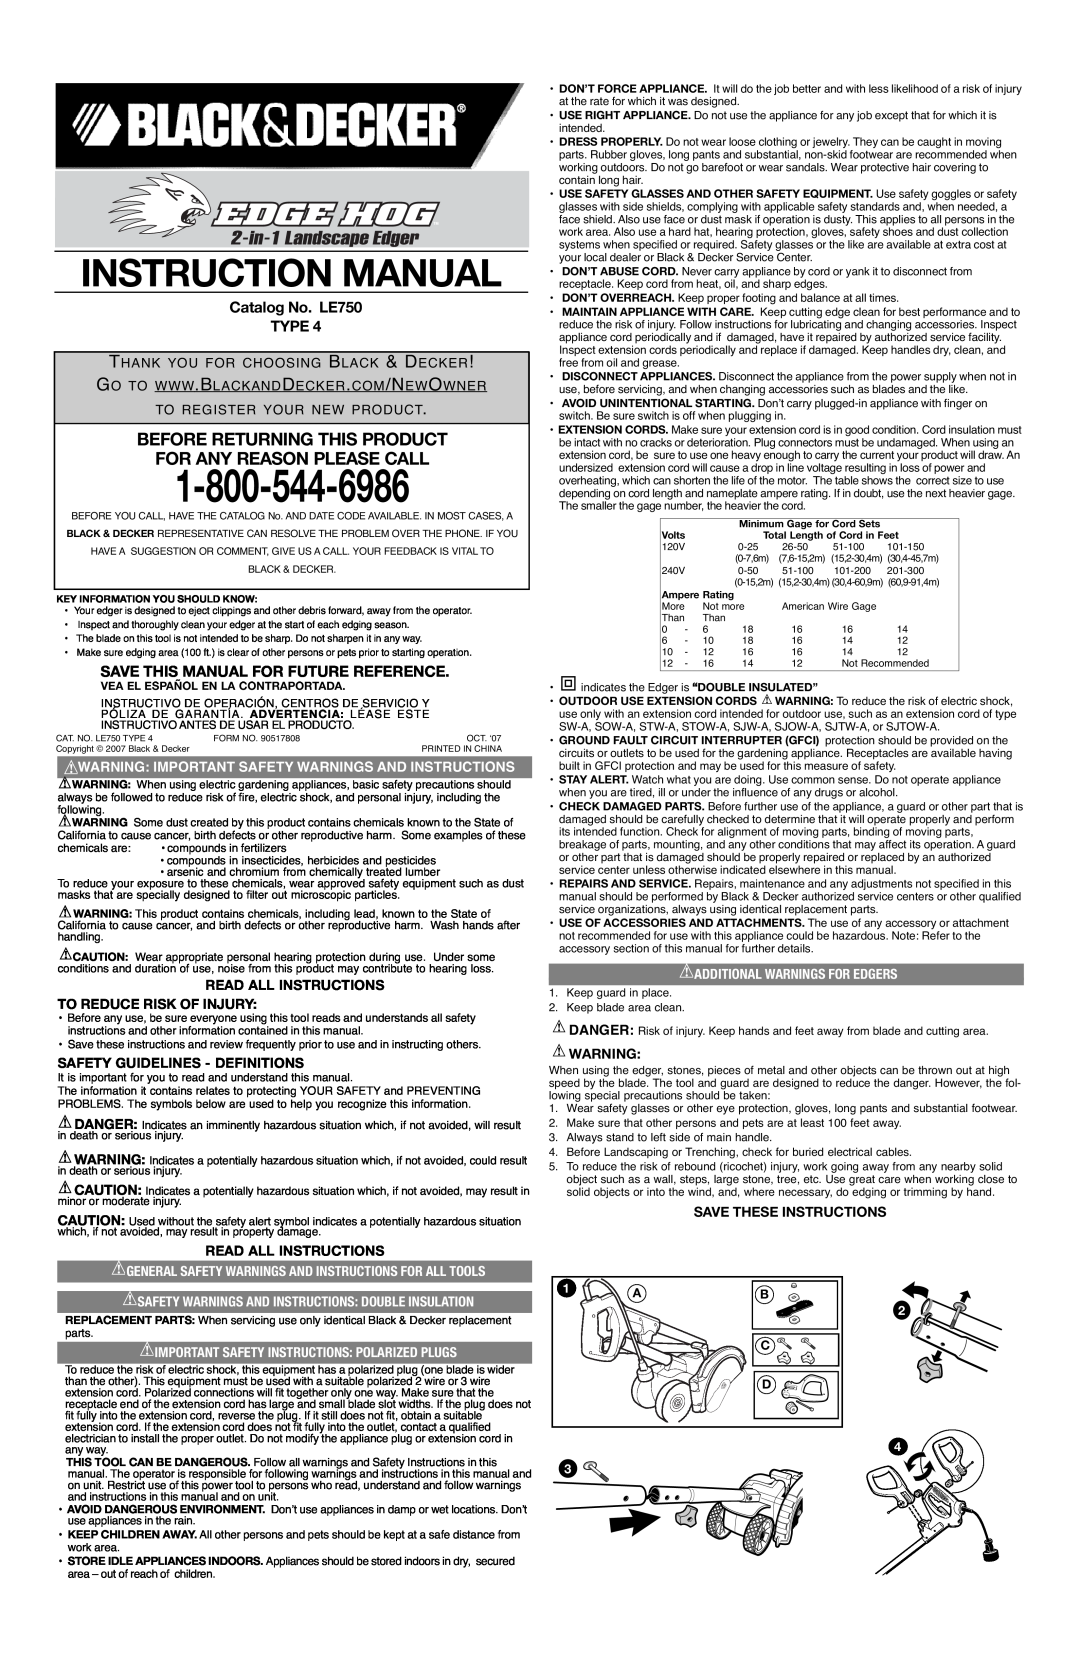 Black & Decker LE750 Type 4 instruction manual Catalog No. LE750 TYPE, Save This Manual For Future Reference 